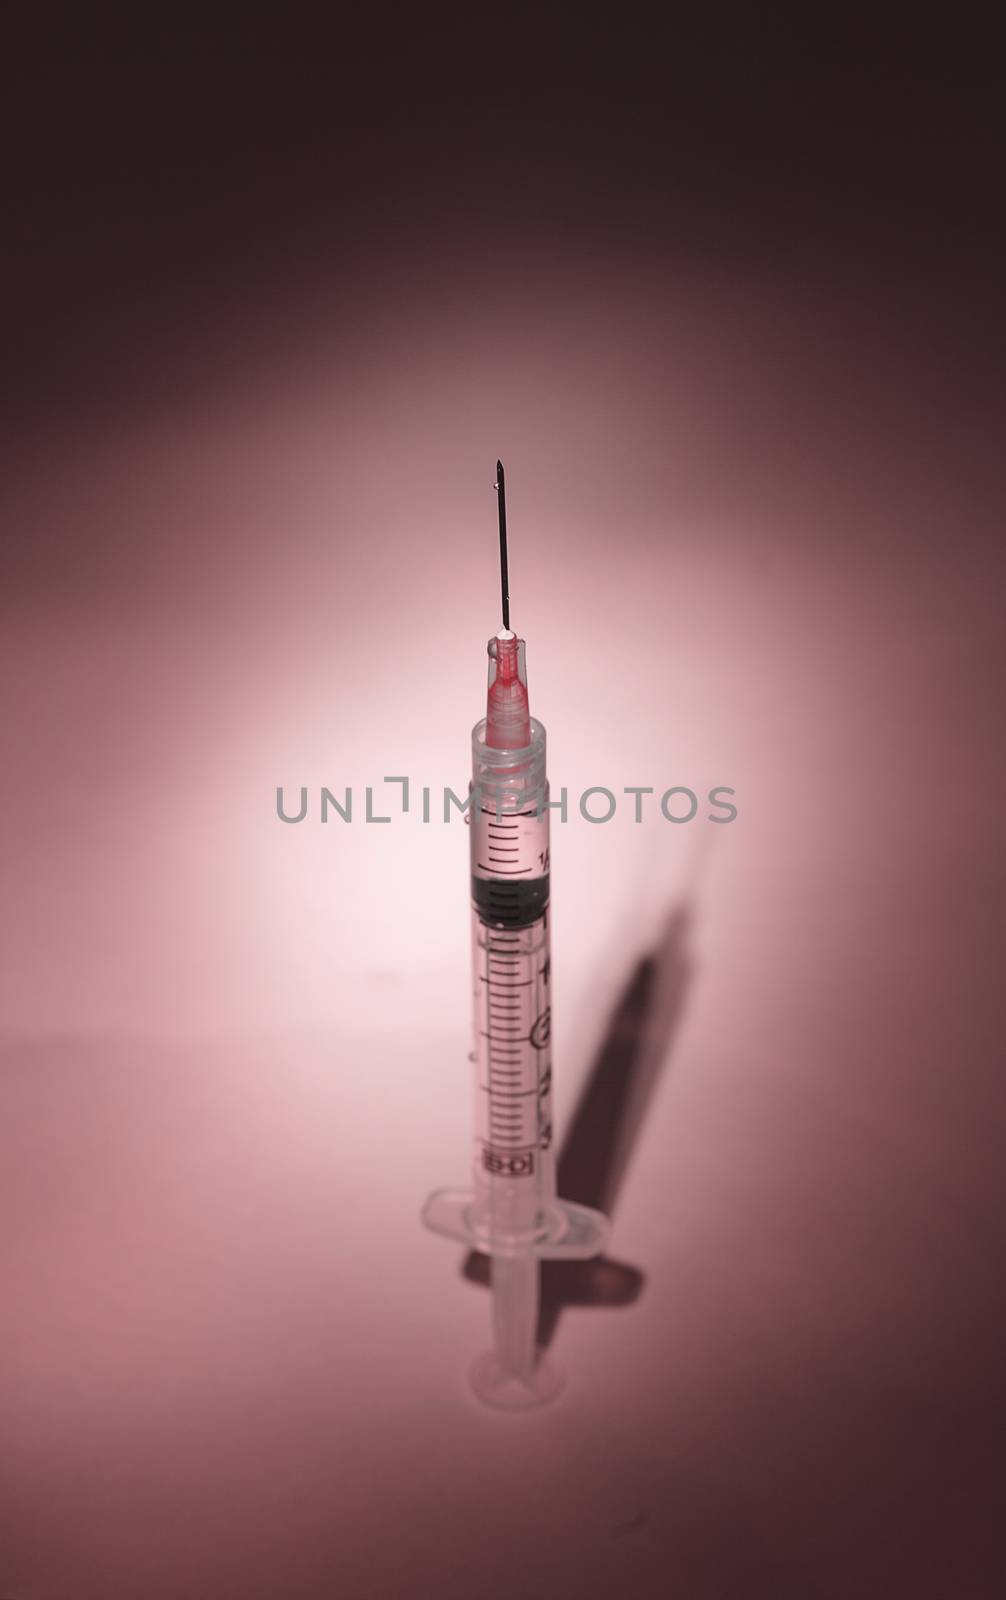 Long hypodermic needle ready for injection in a medical doctor’s office in the emergency room of a hospital.